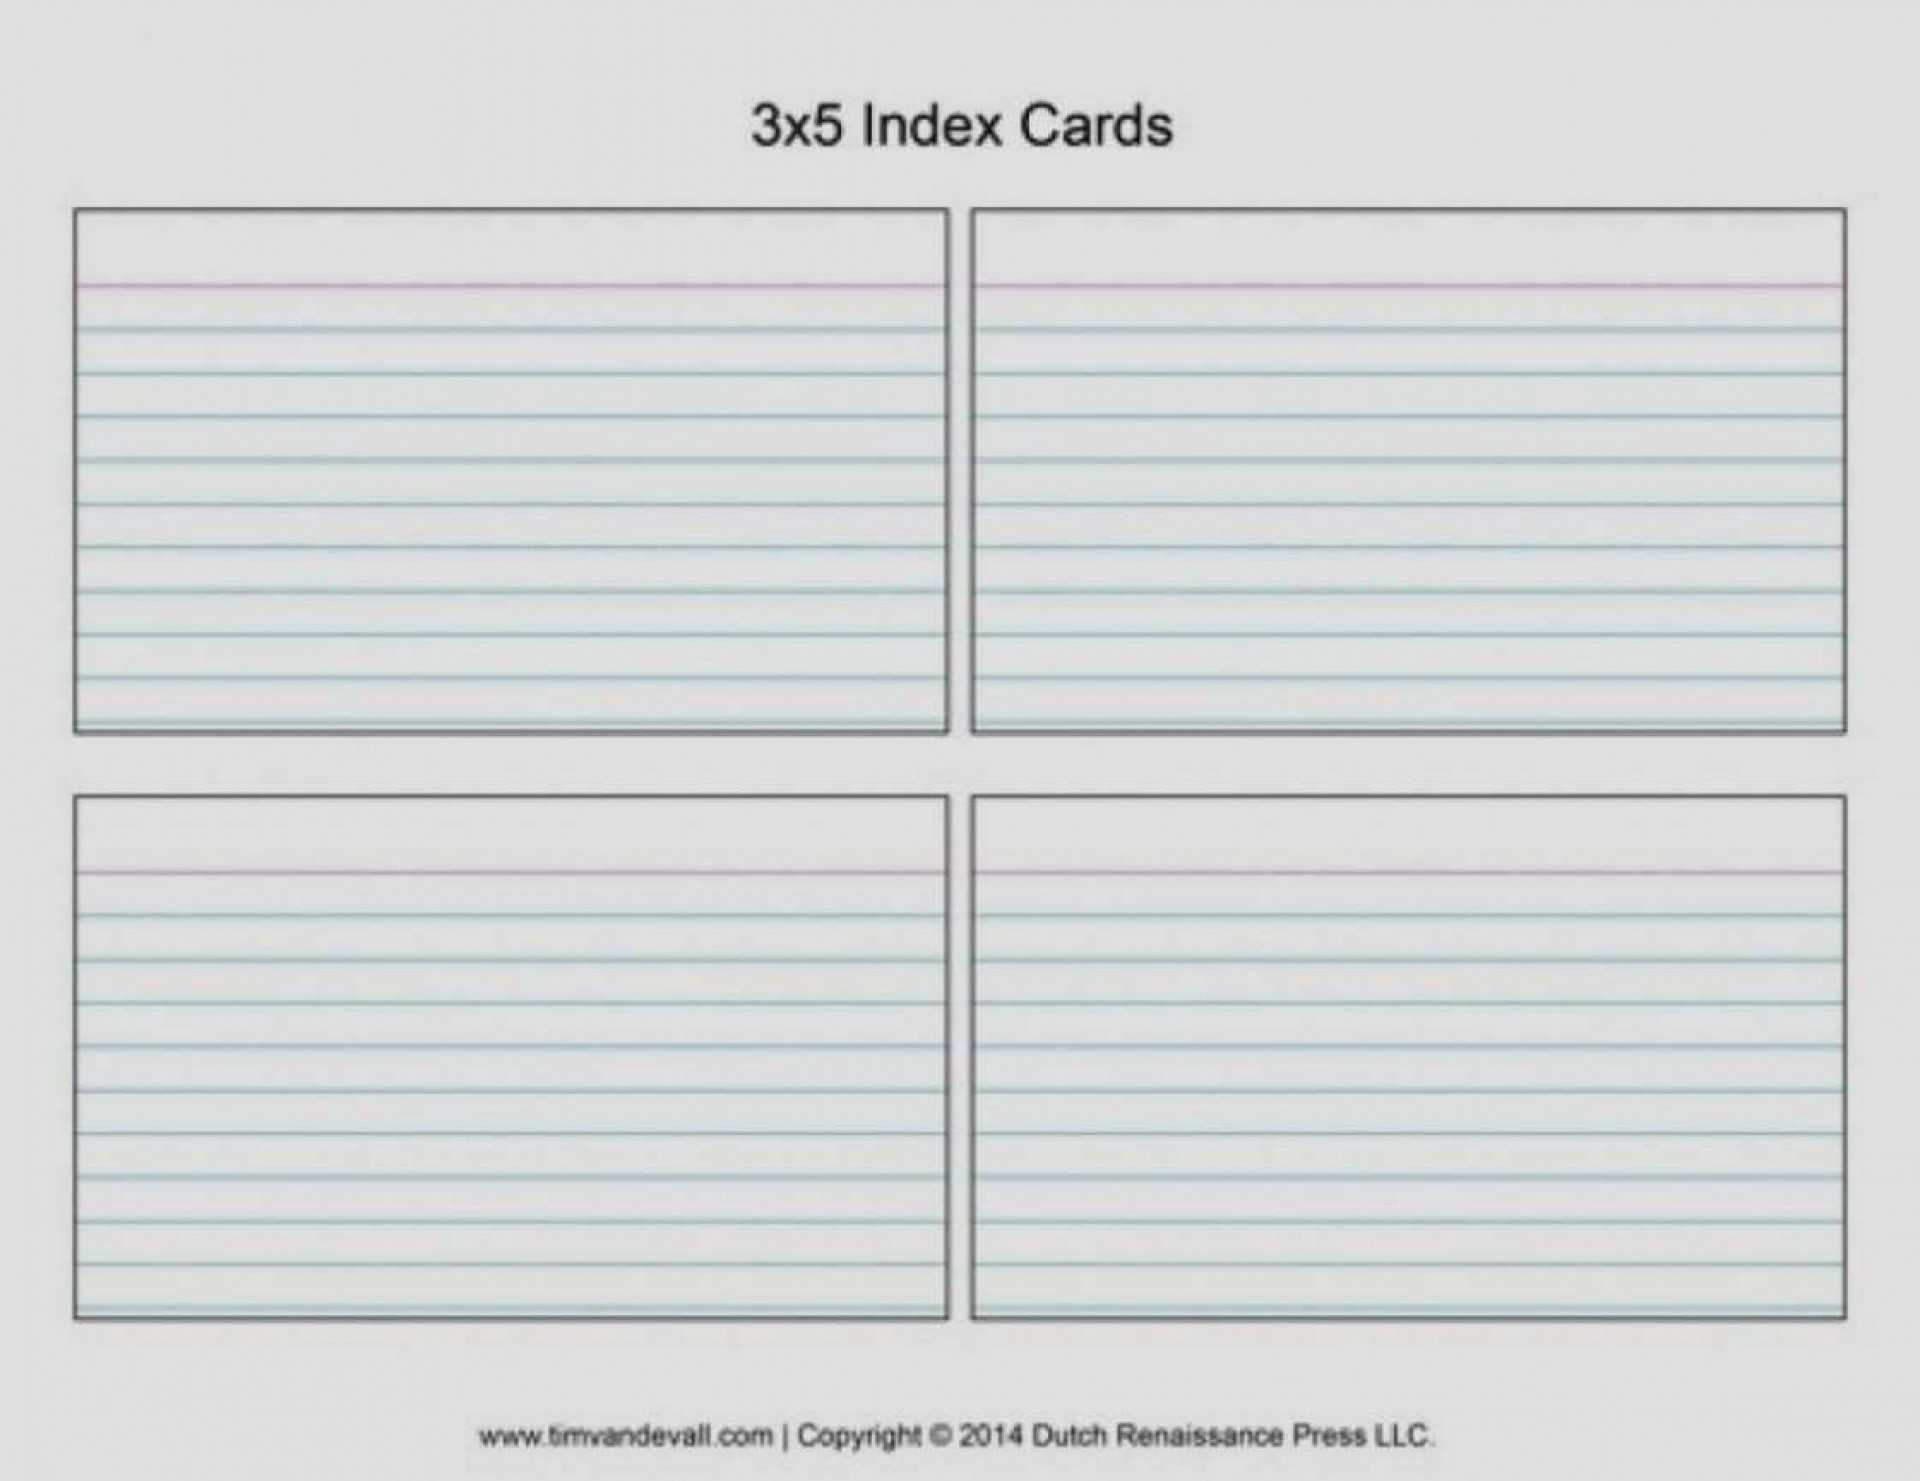 3 X 5 Index Card Template - Cumed With Regard To 3 X 5 Index Card Template